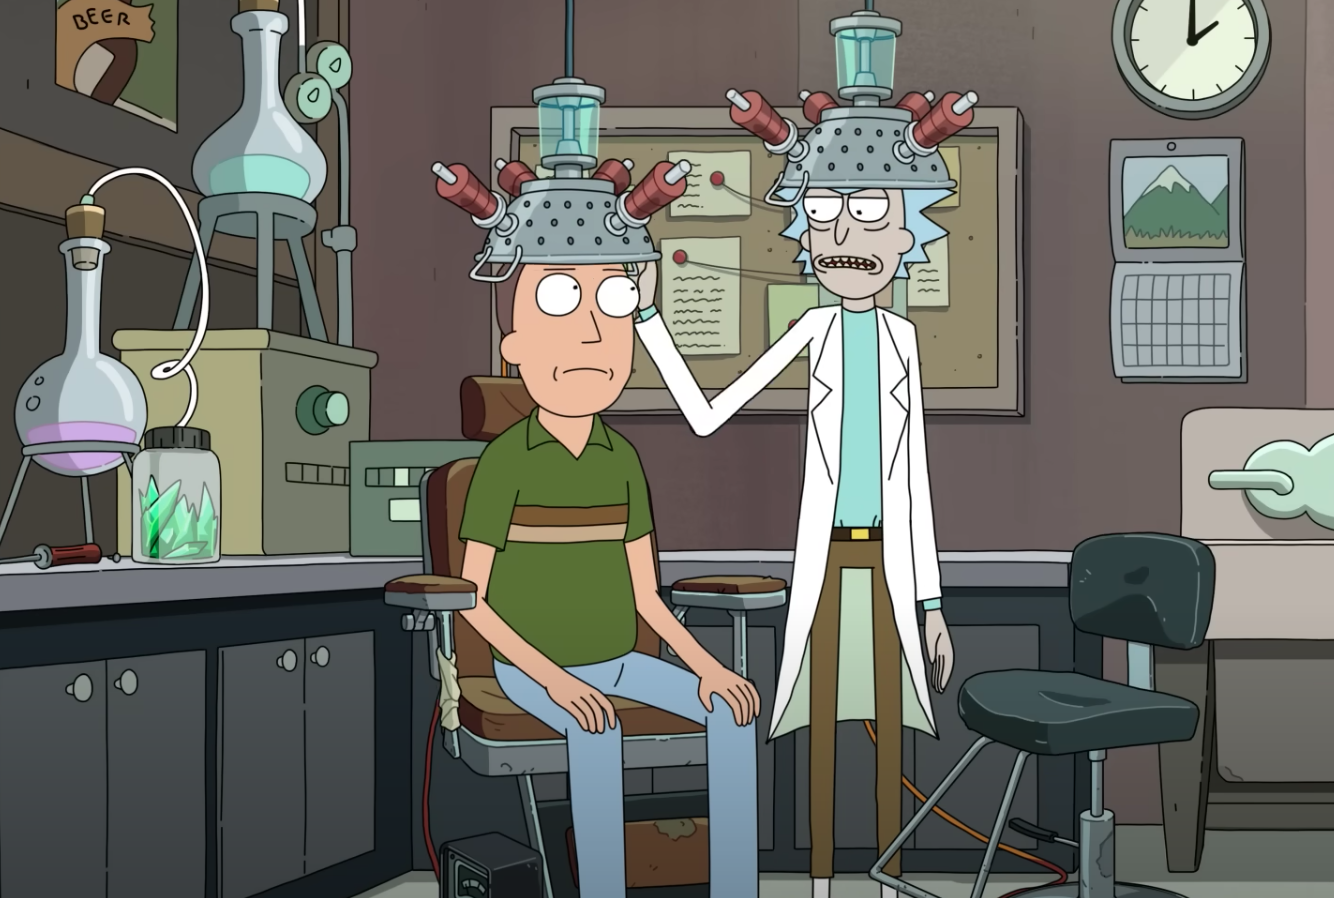 How to Watch Rick and Morty Online: Your 3 Best Options